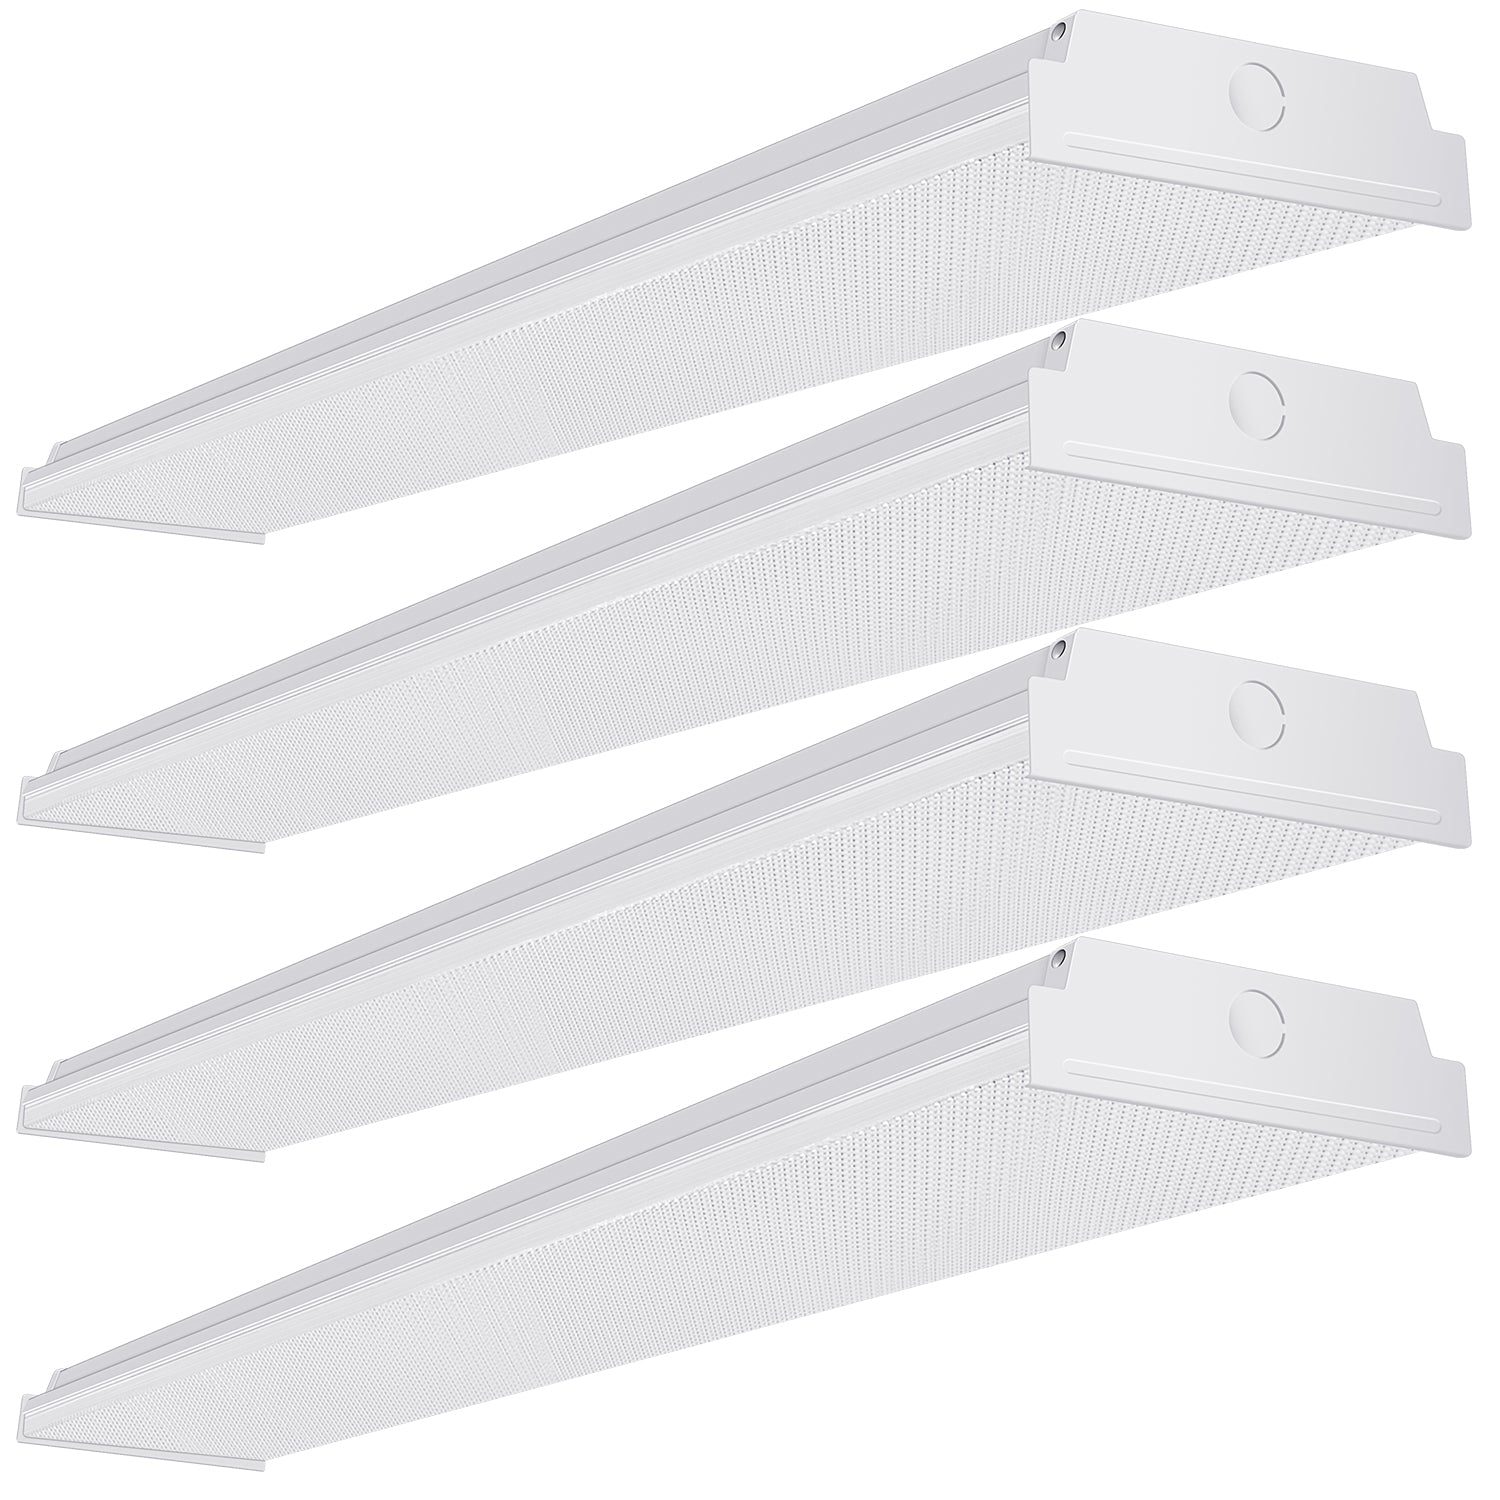 AntLux 4ft LED Garage Lights LED Wraparound Light Fixture, 50W 5500LM, 4000K Neutral White, Integrated Low Profile Linear Flush Mount Ceiling Lighting, 128W Fluorescent Tube Replacement, 4 Pack